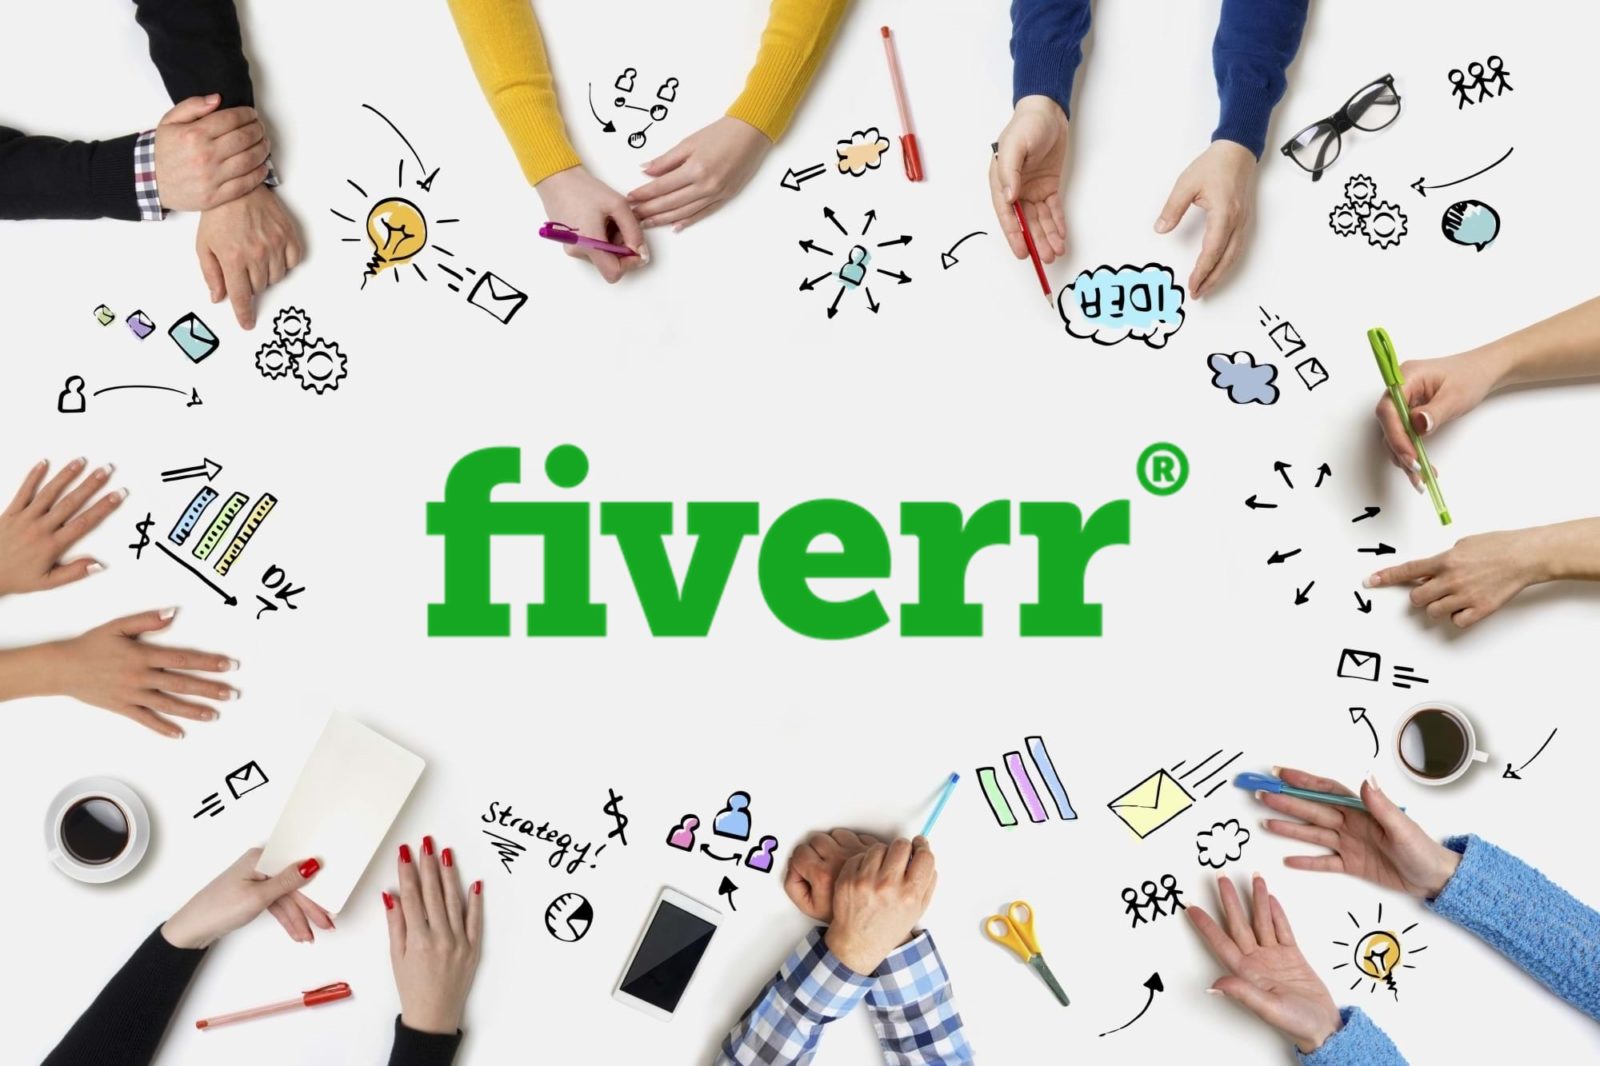 Fiverr Releases its 2022 Environmental, Social and Governance (ESG